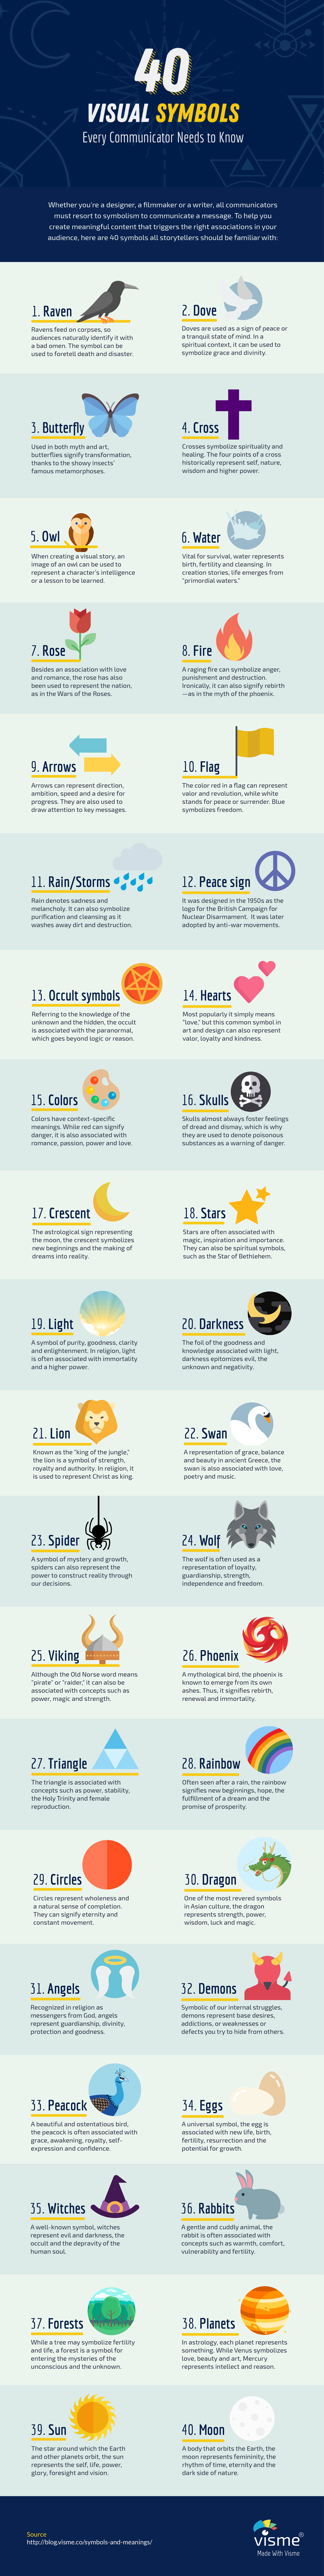 Common Symbols In Dreams Of Taking Pictures